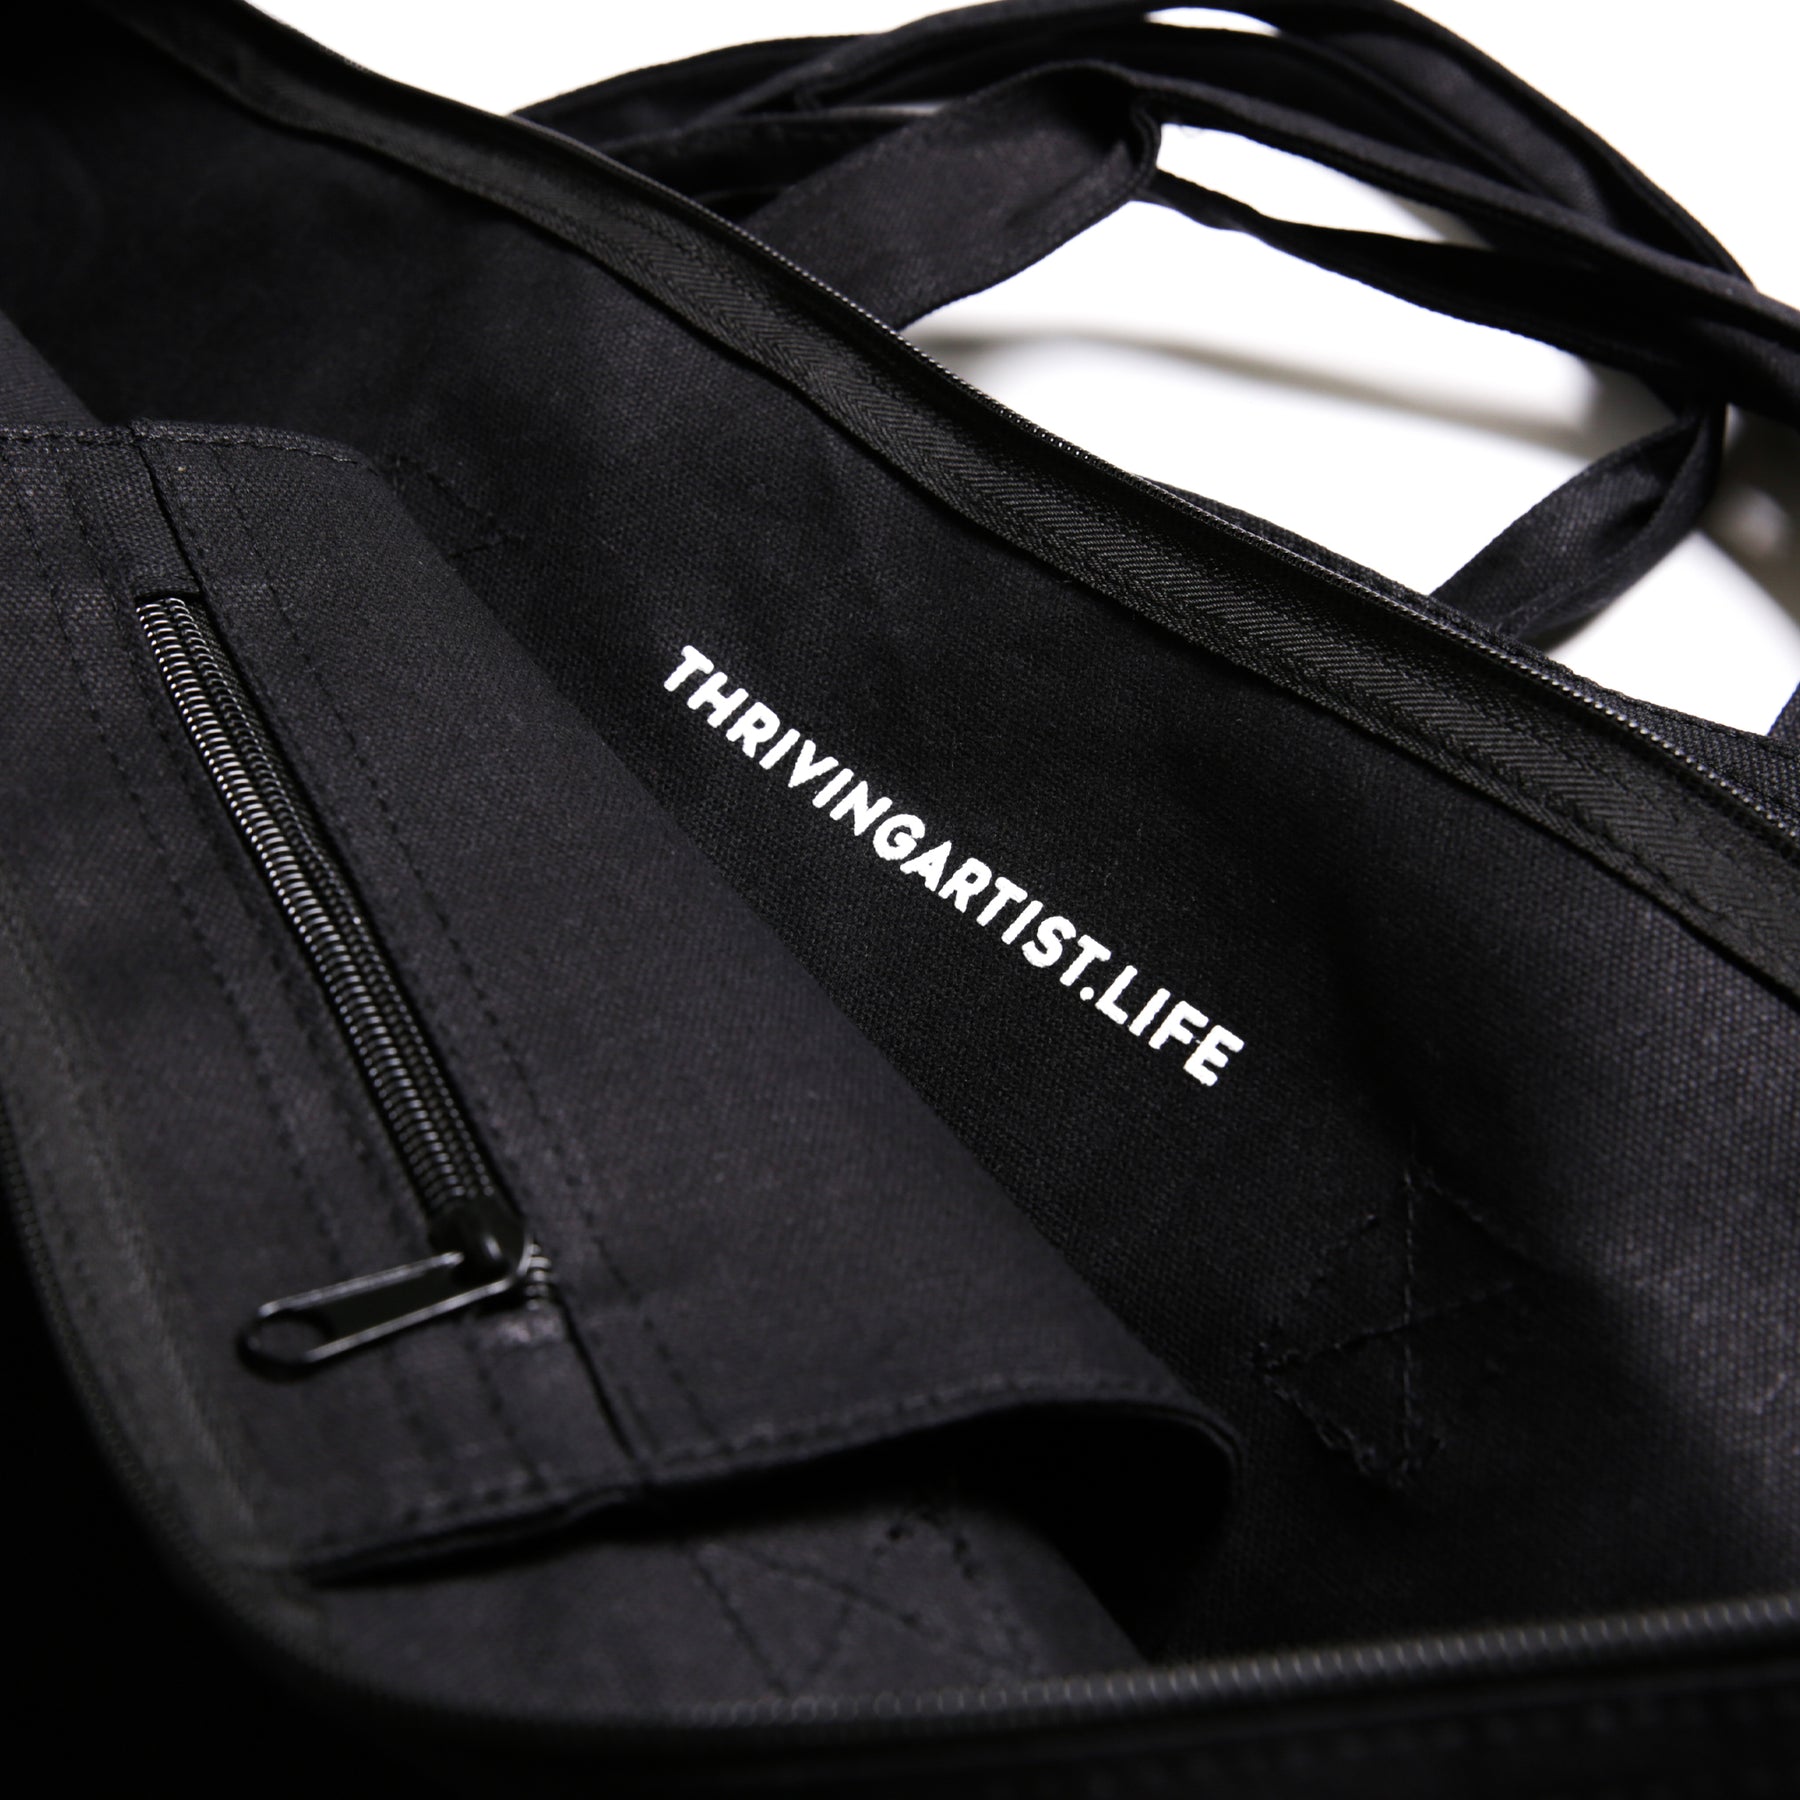 CLN - Carry your essentials with style. Shop the Selflessness Bag